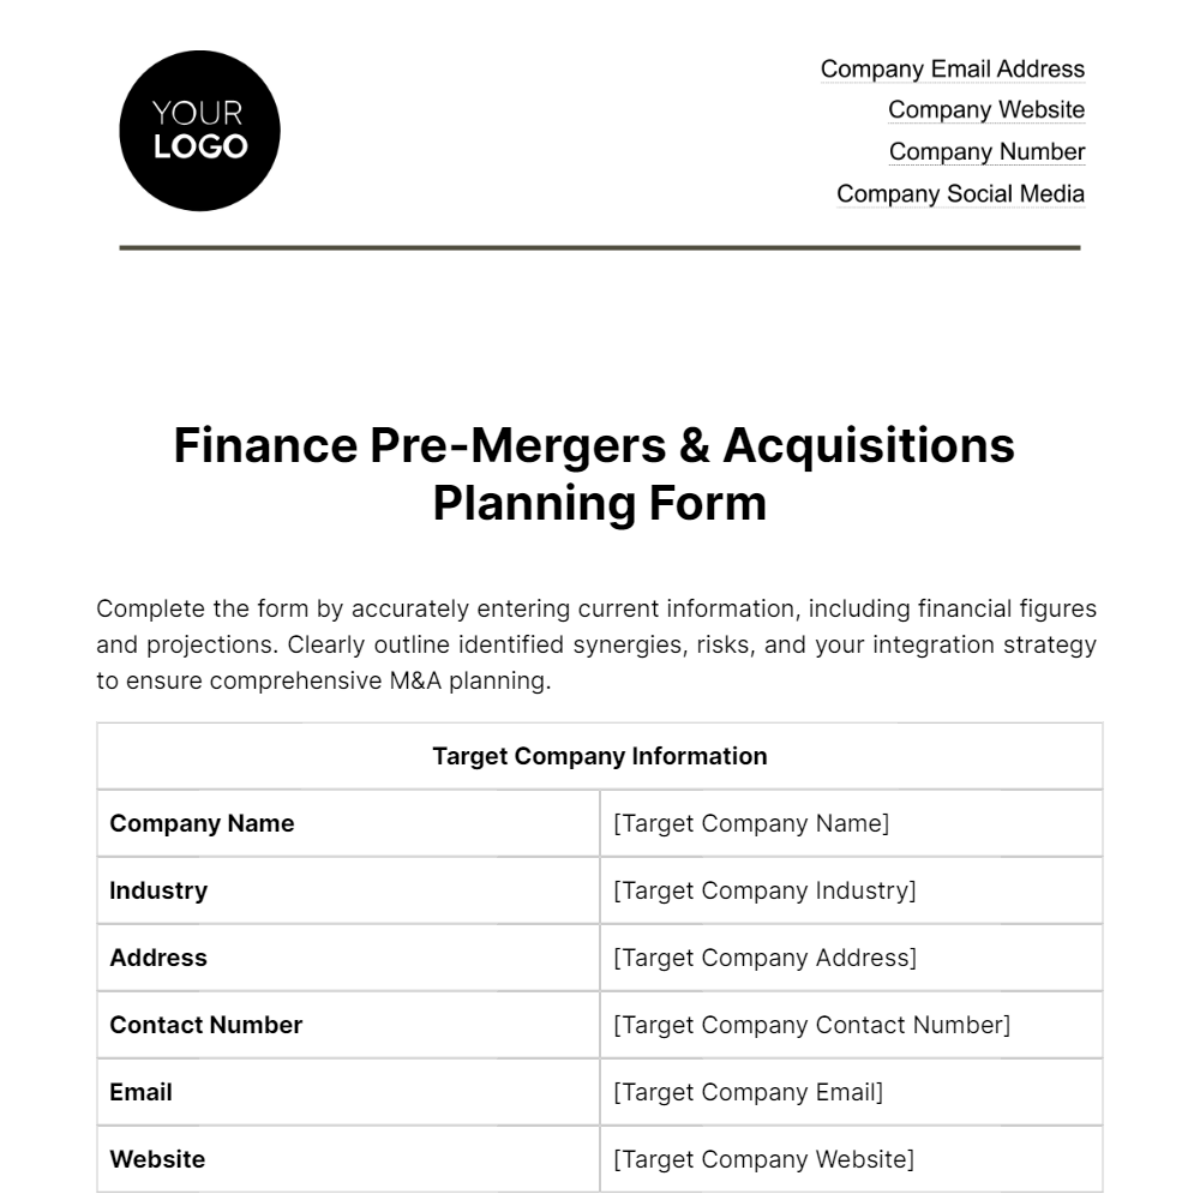 Finance Pre-Mergers & Acquisitions Planning Form Template